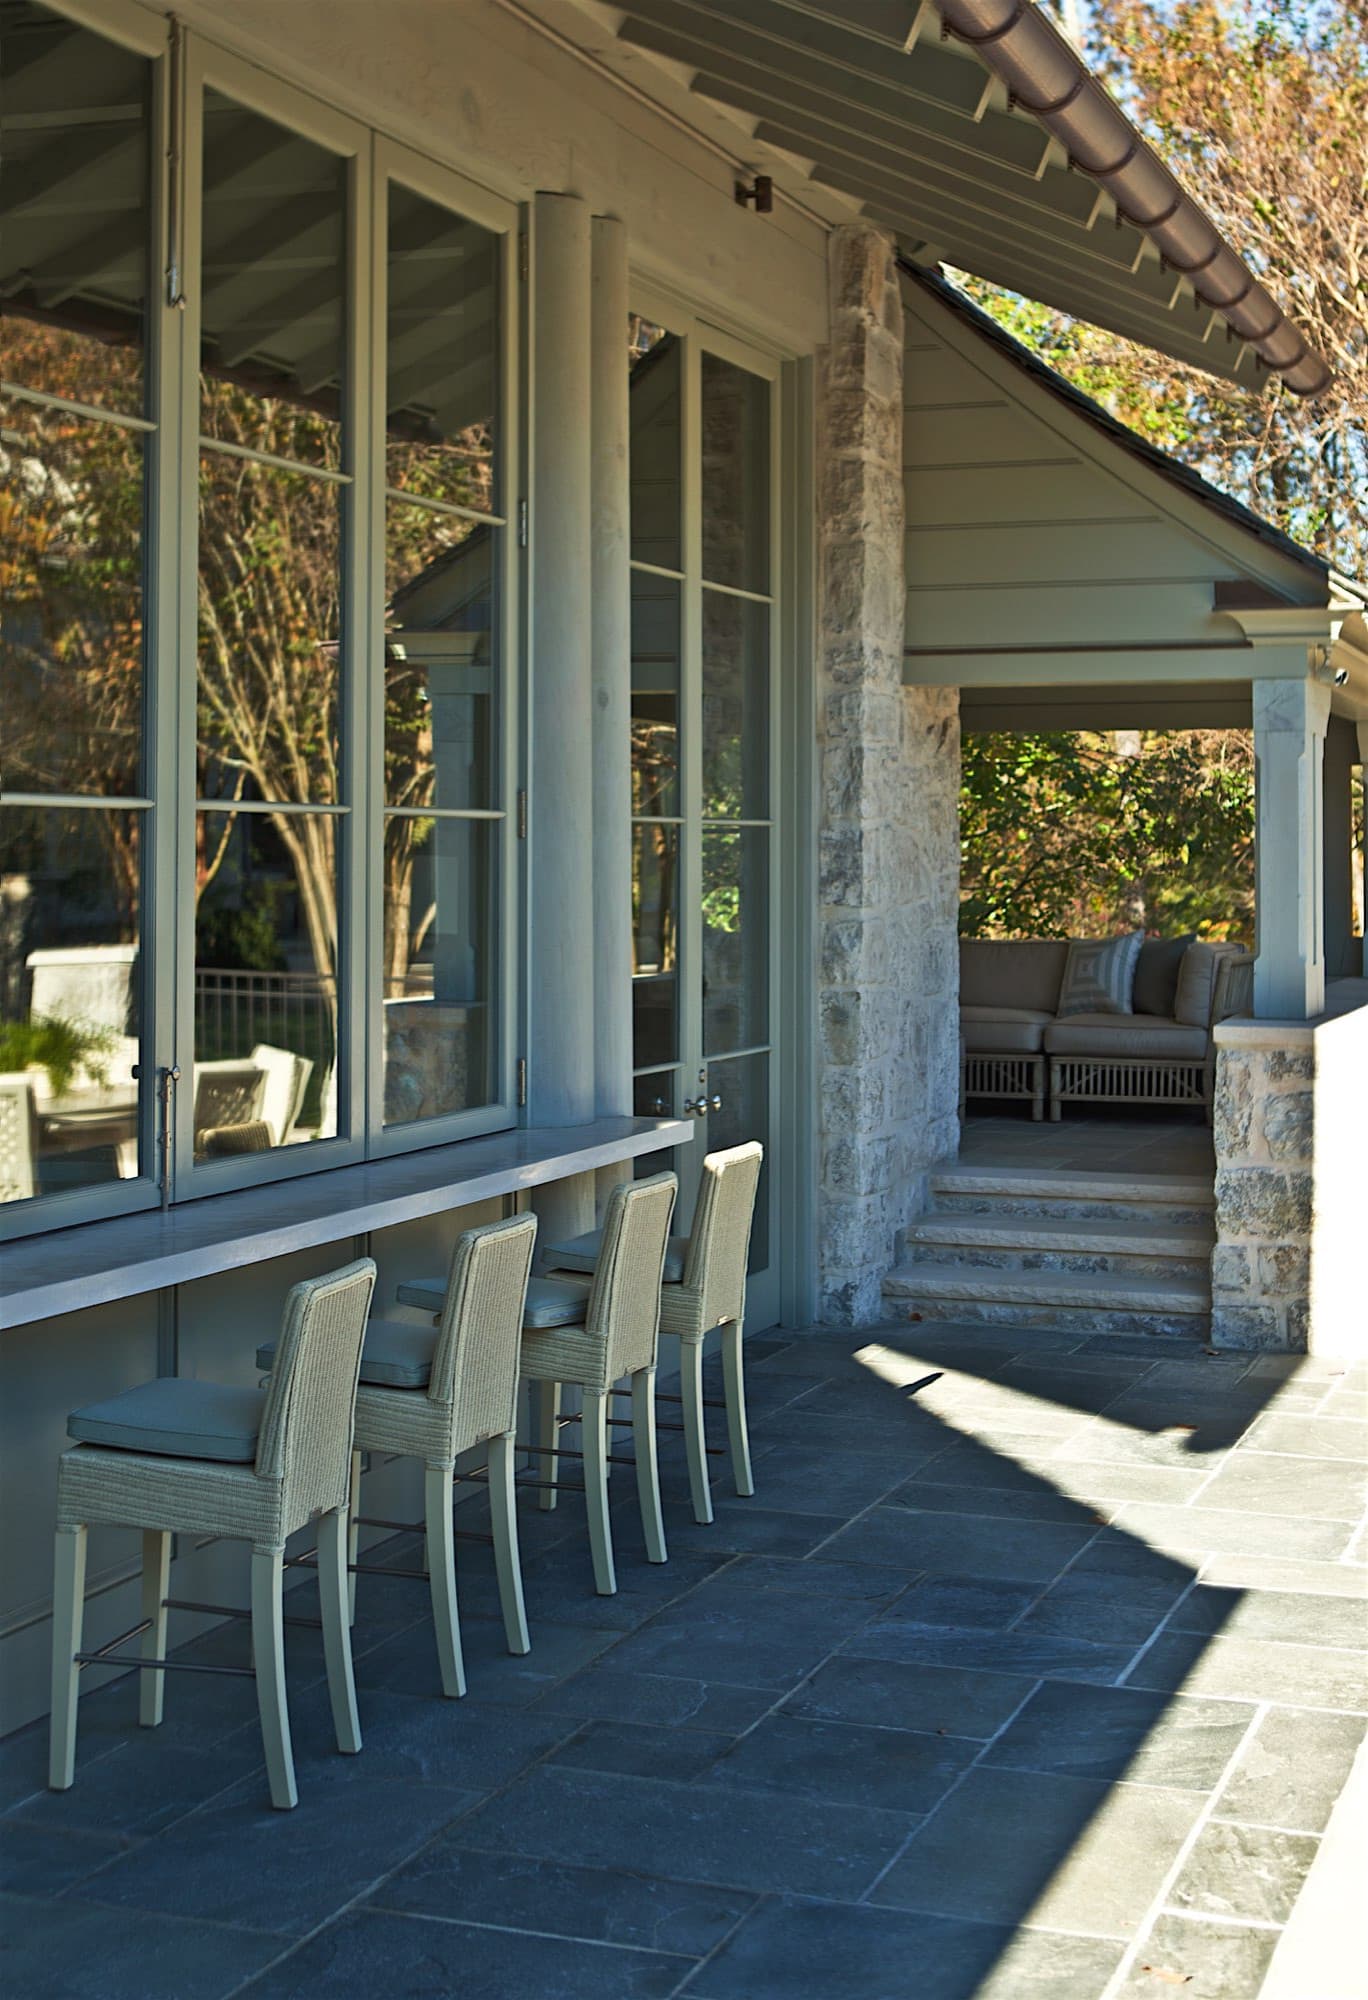 Home tour featuring stone wall exteriors with traditional style.